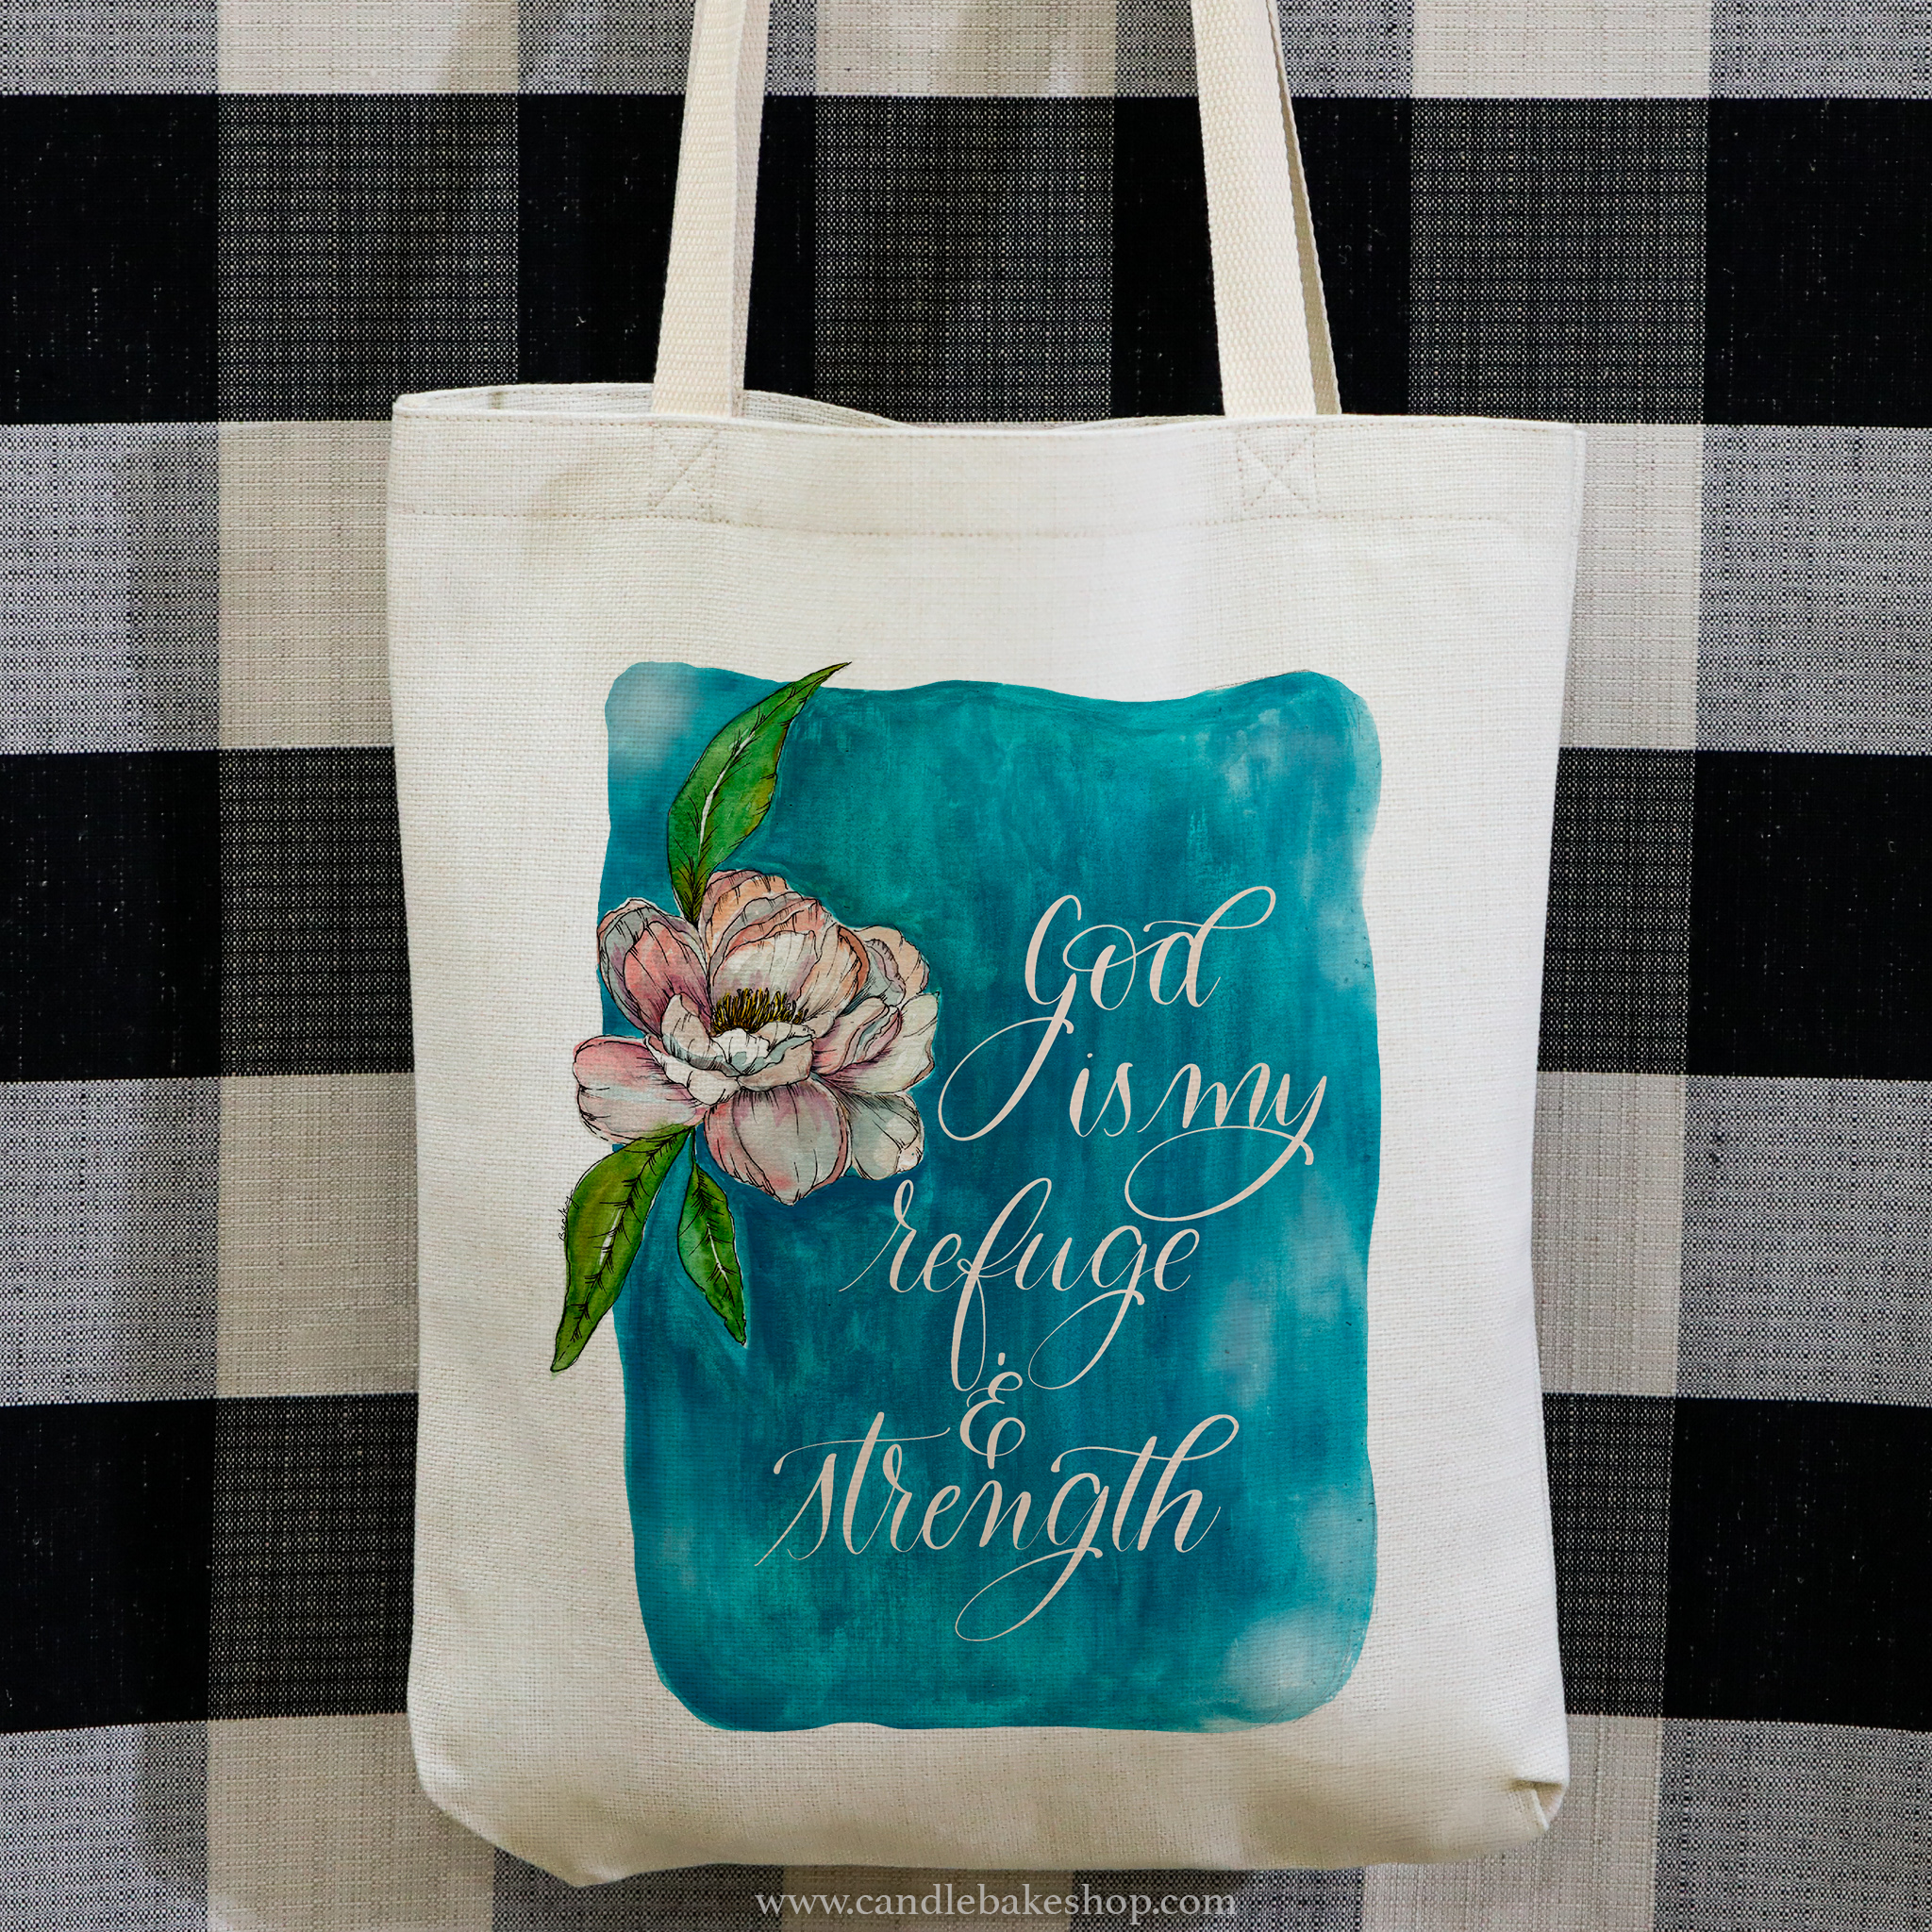 God Is My Refuge And Strength Tote Bag - Psalm 46:1